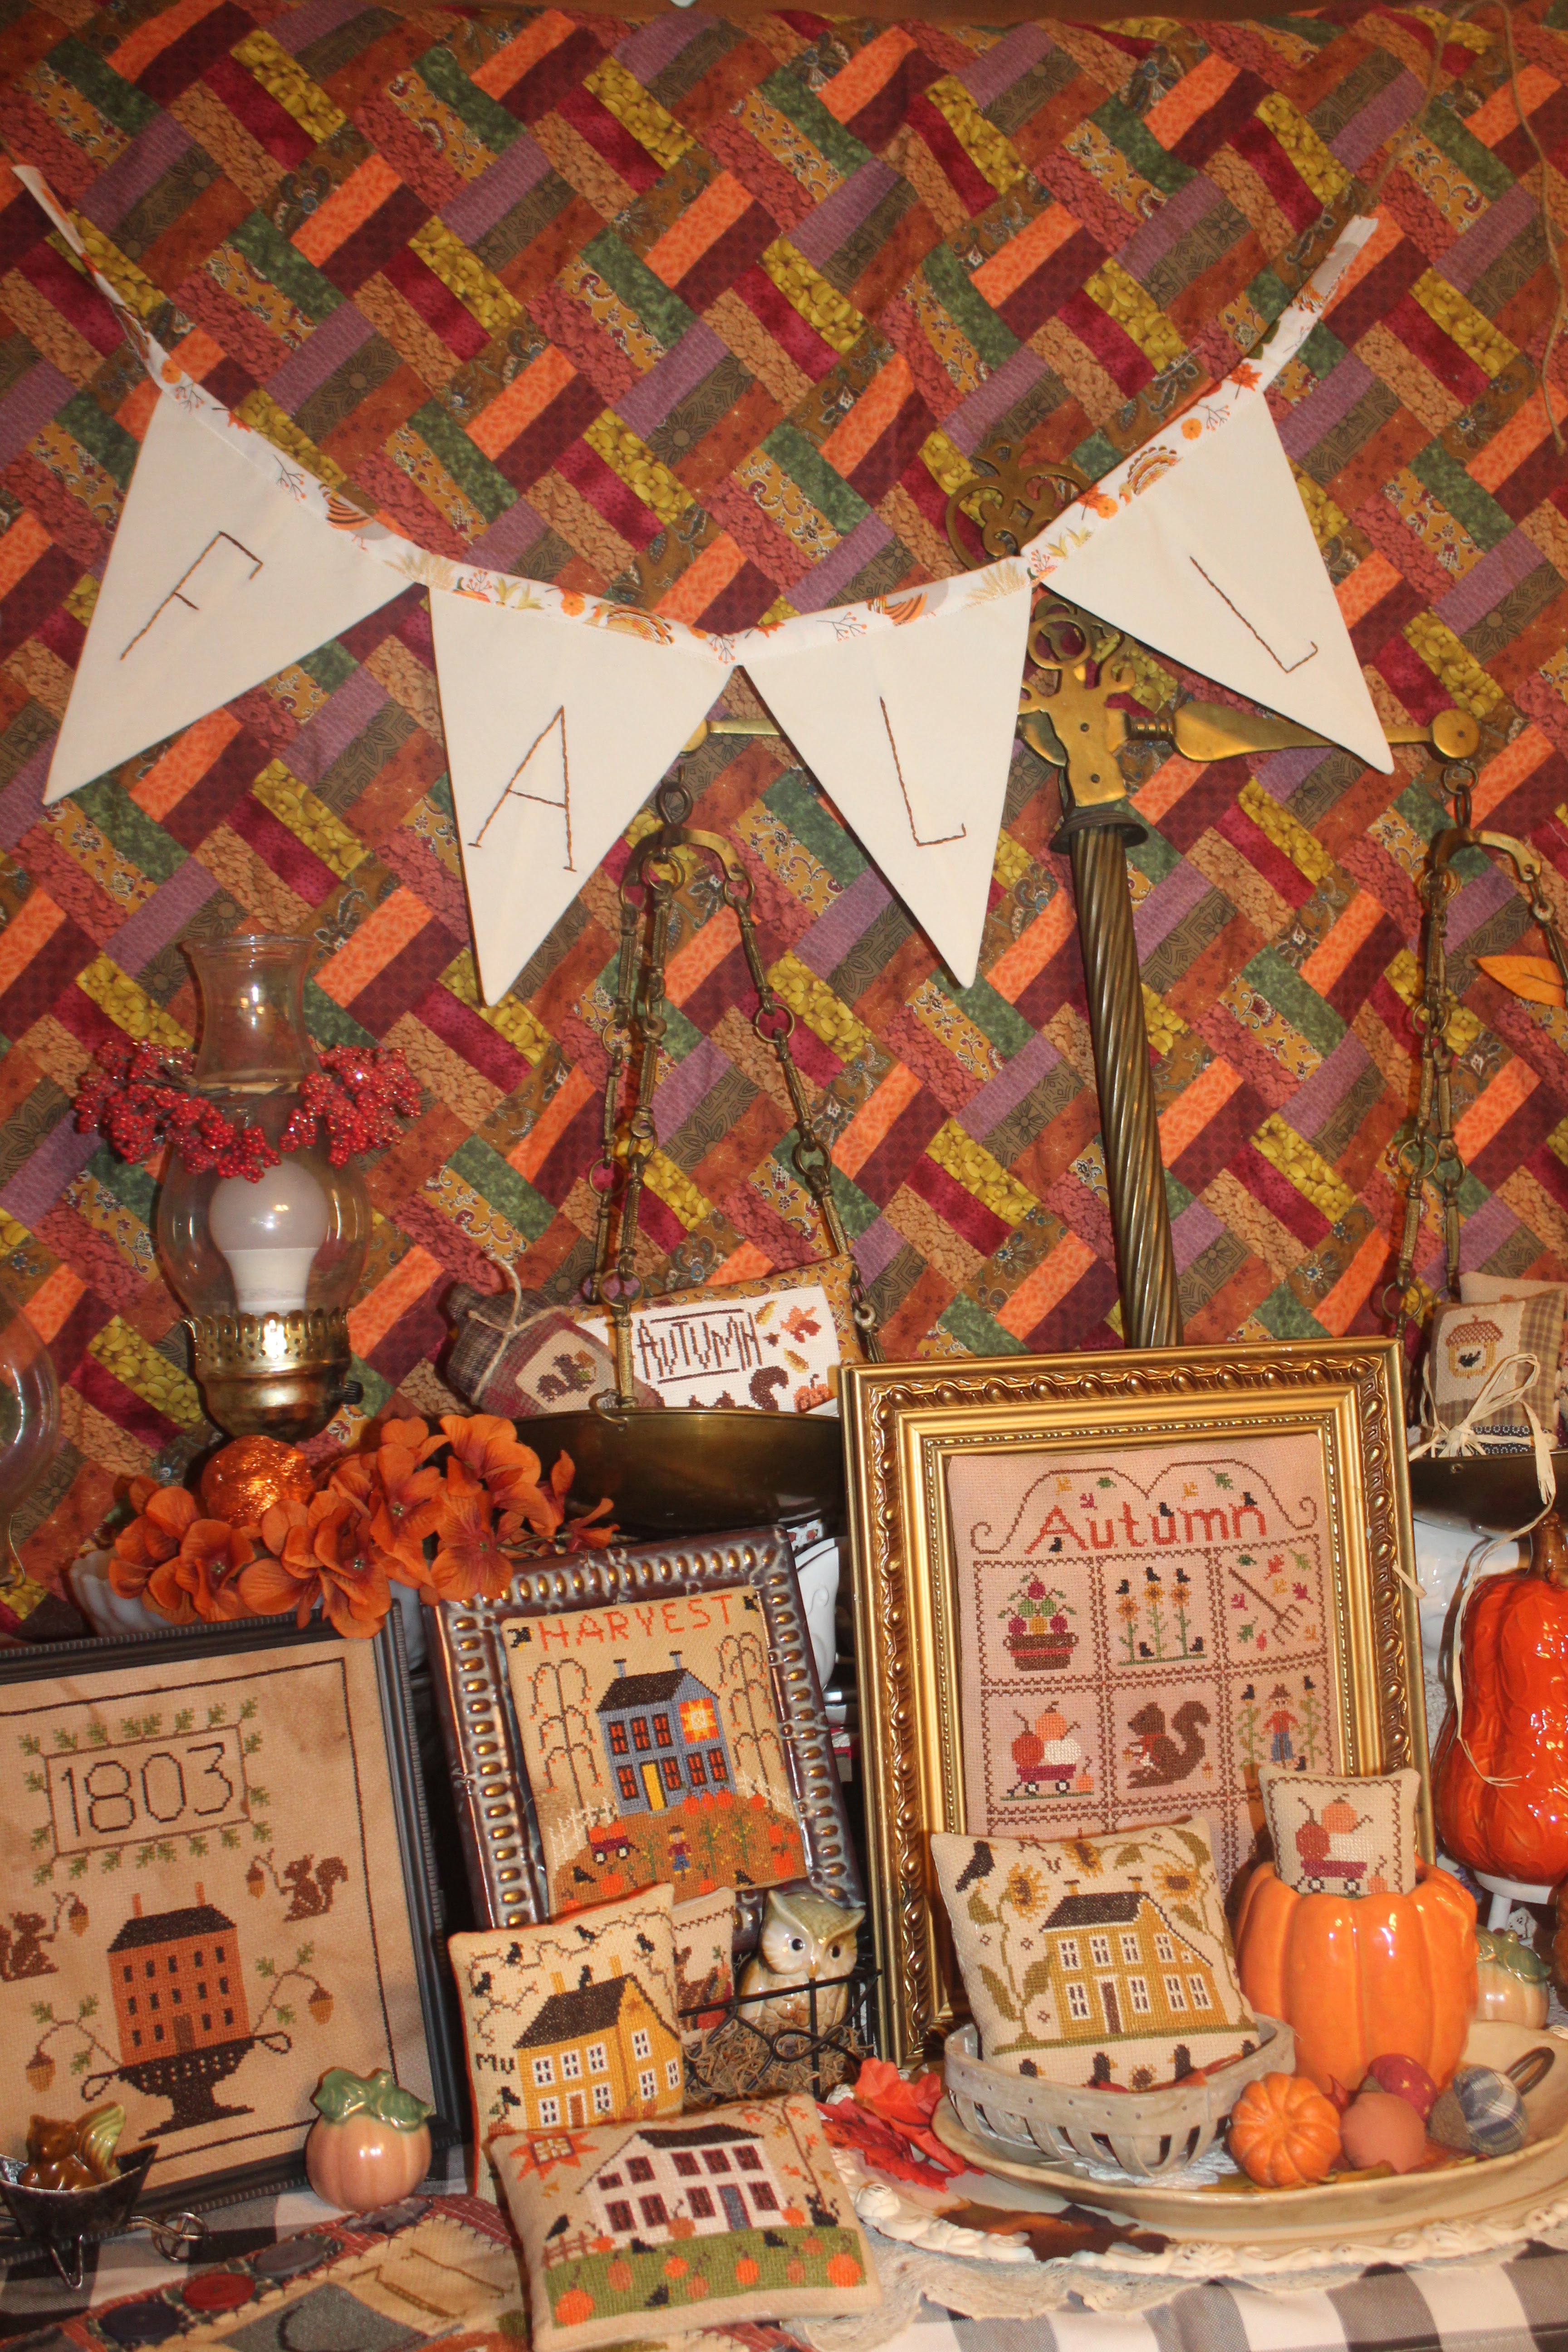 Candy Corn, Pranks, and a Quilt Frame – Thimbleanna